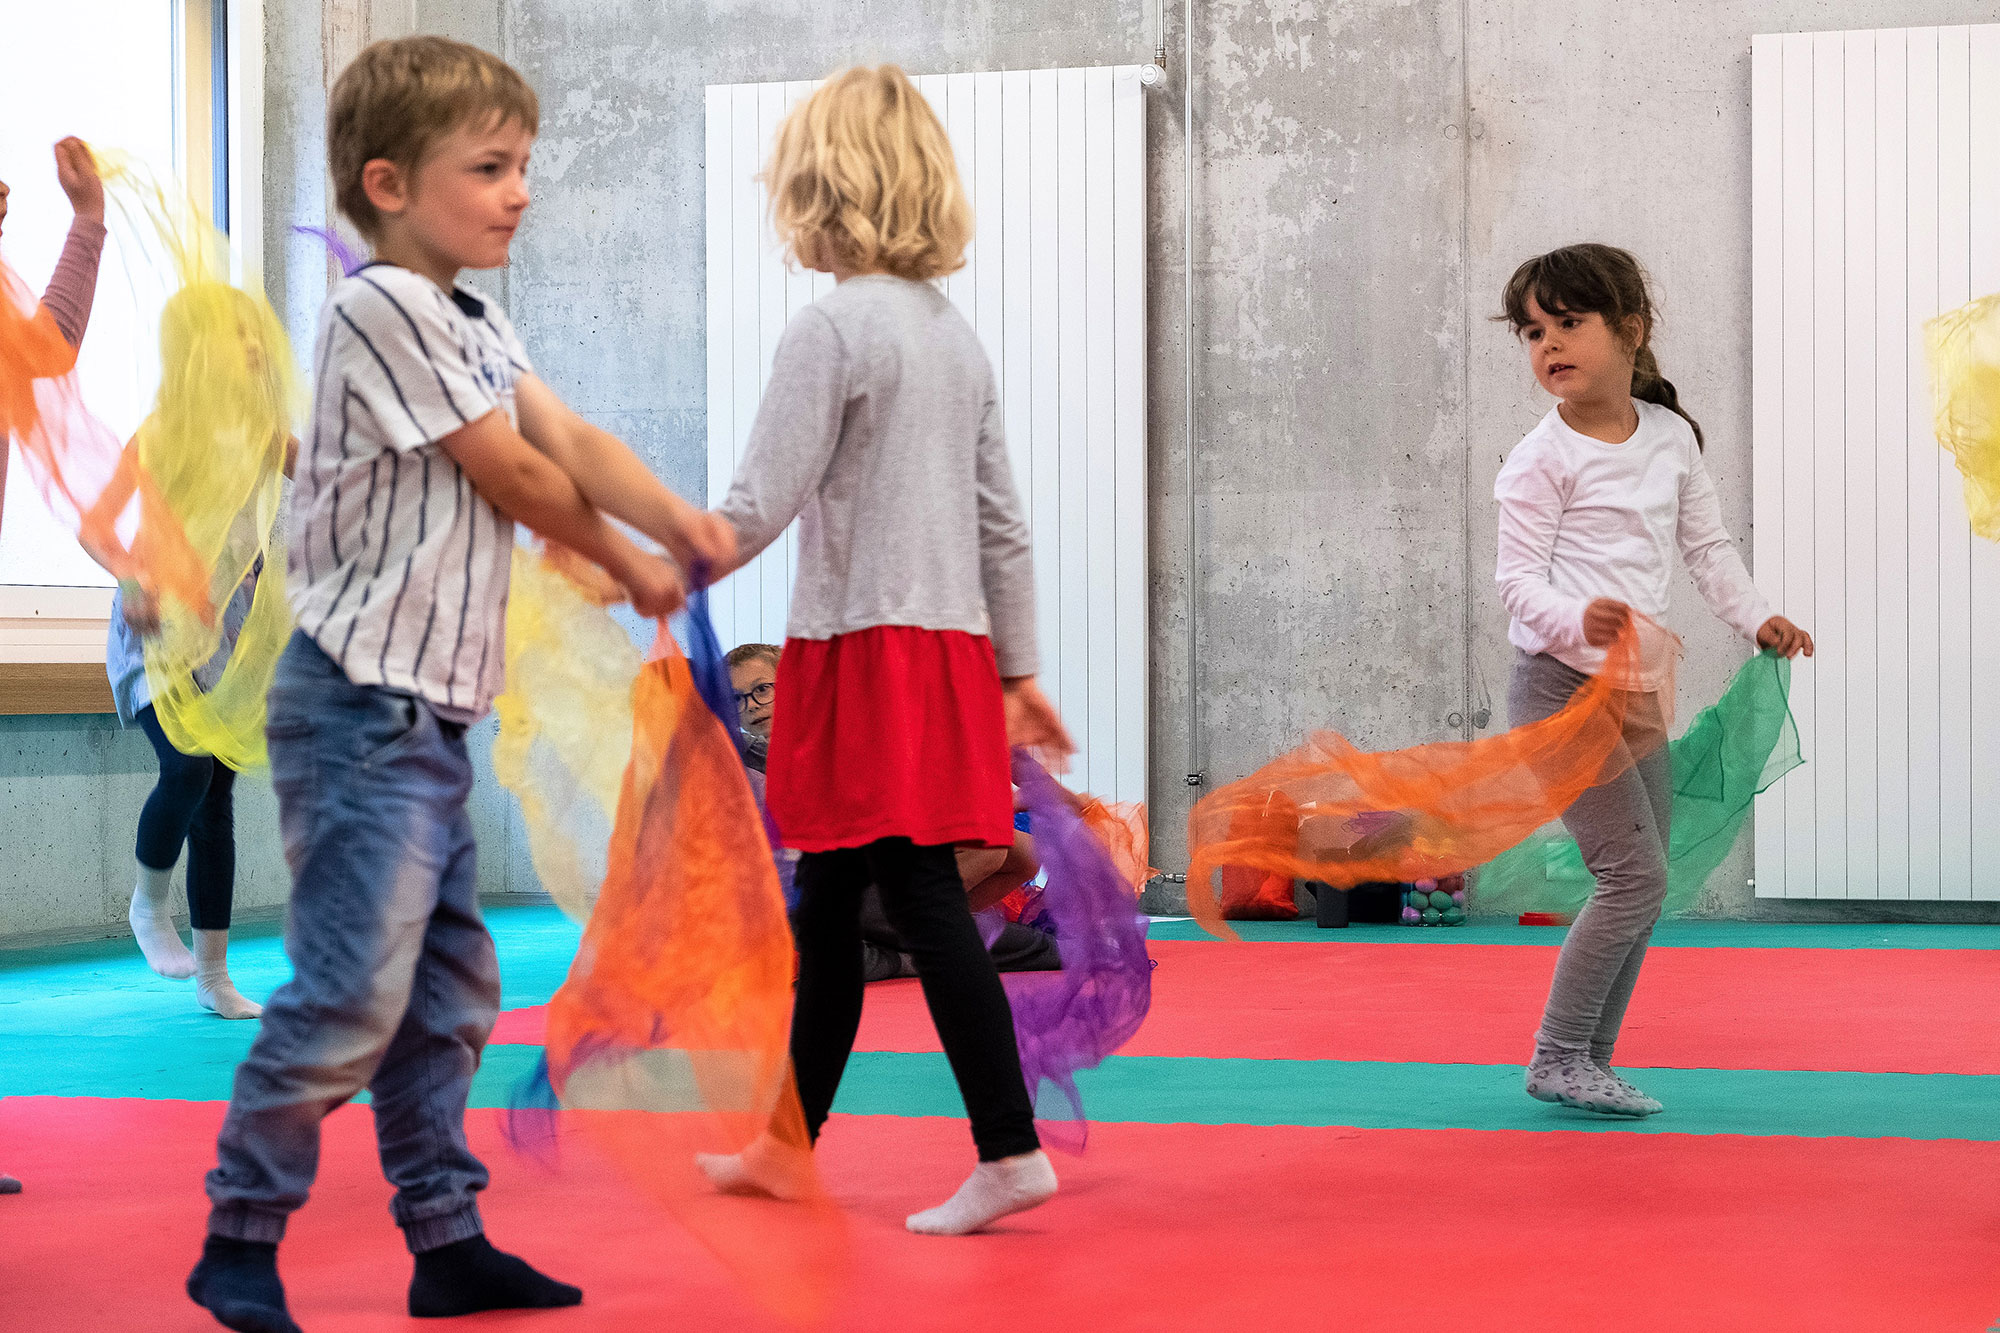 Children dance and move in the sports room carrying colourful silk scarves in their hands.	